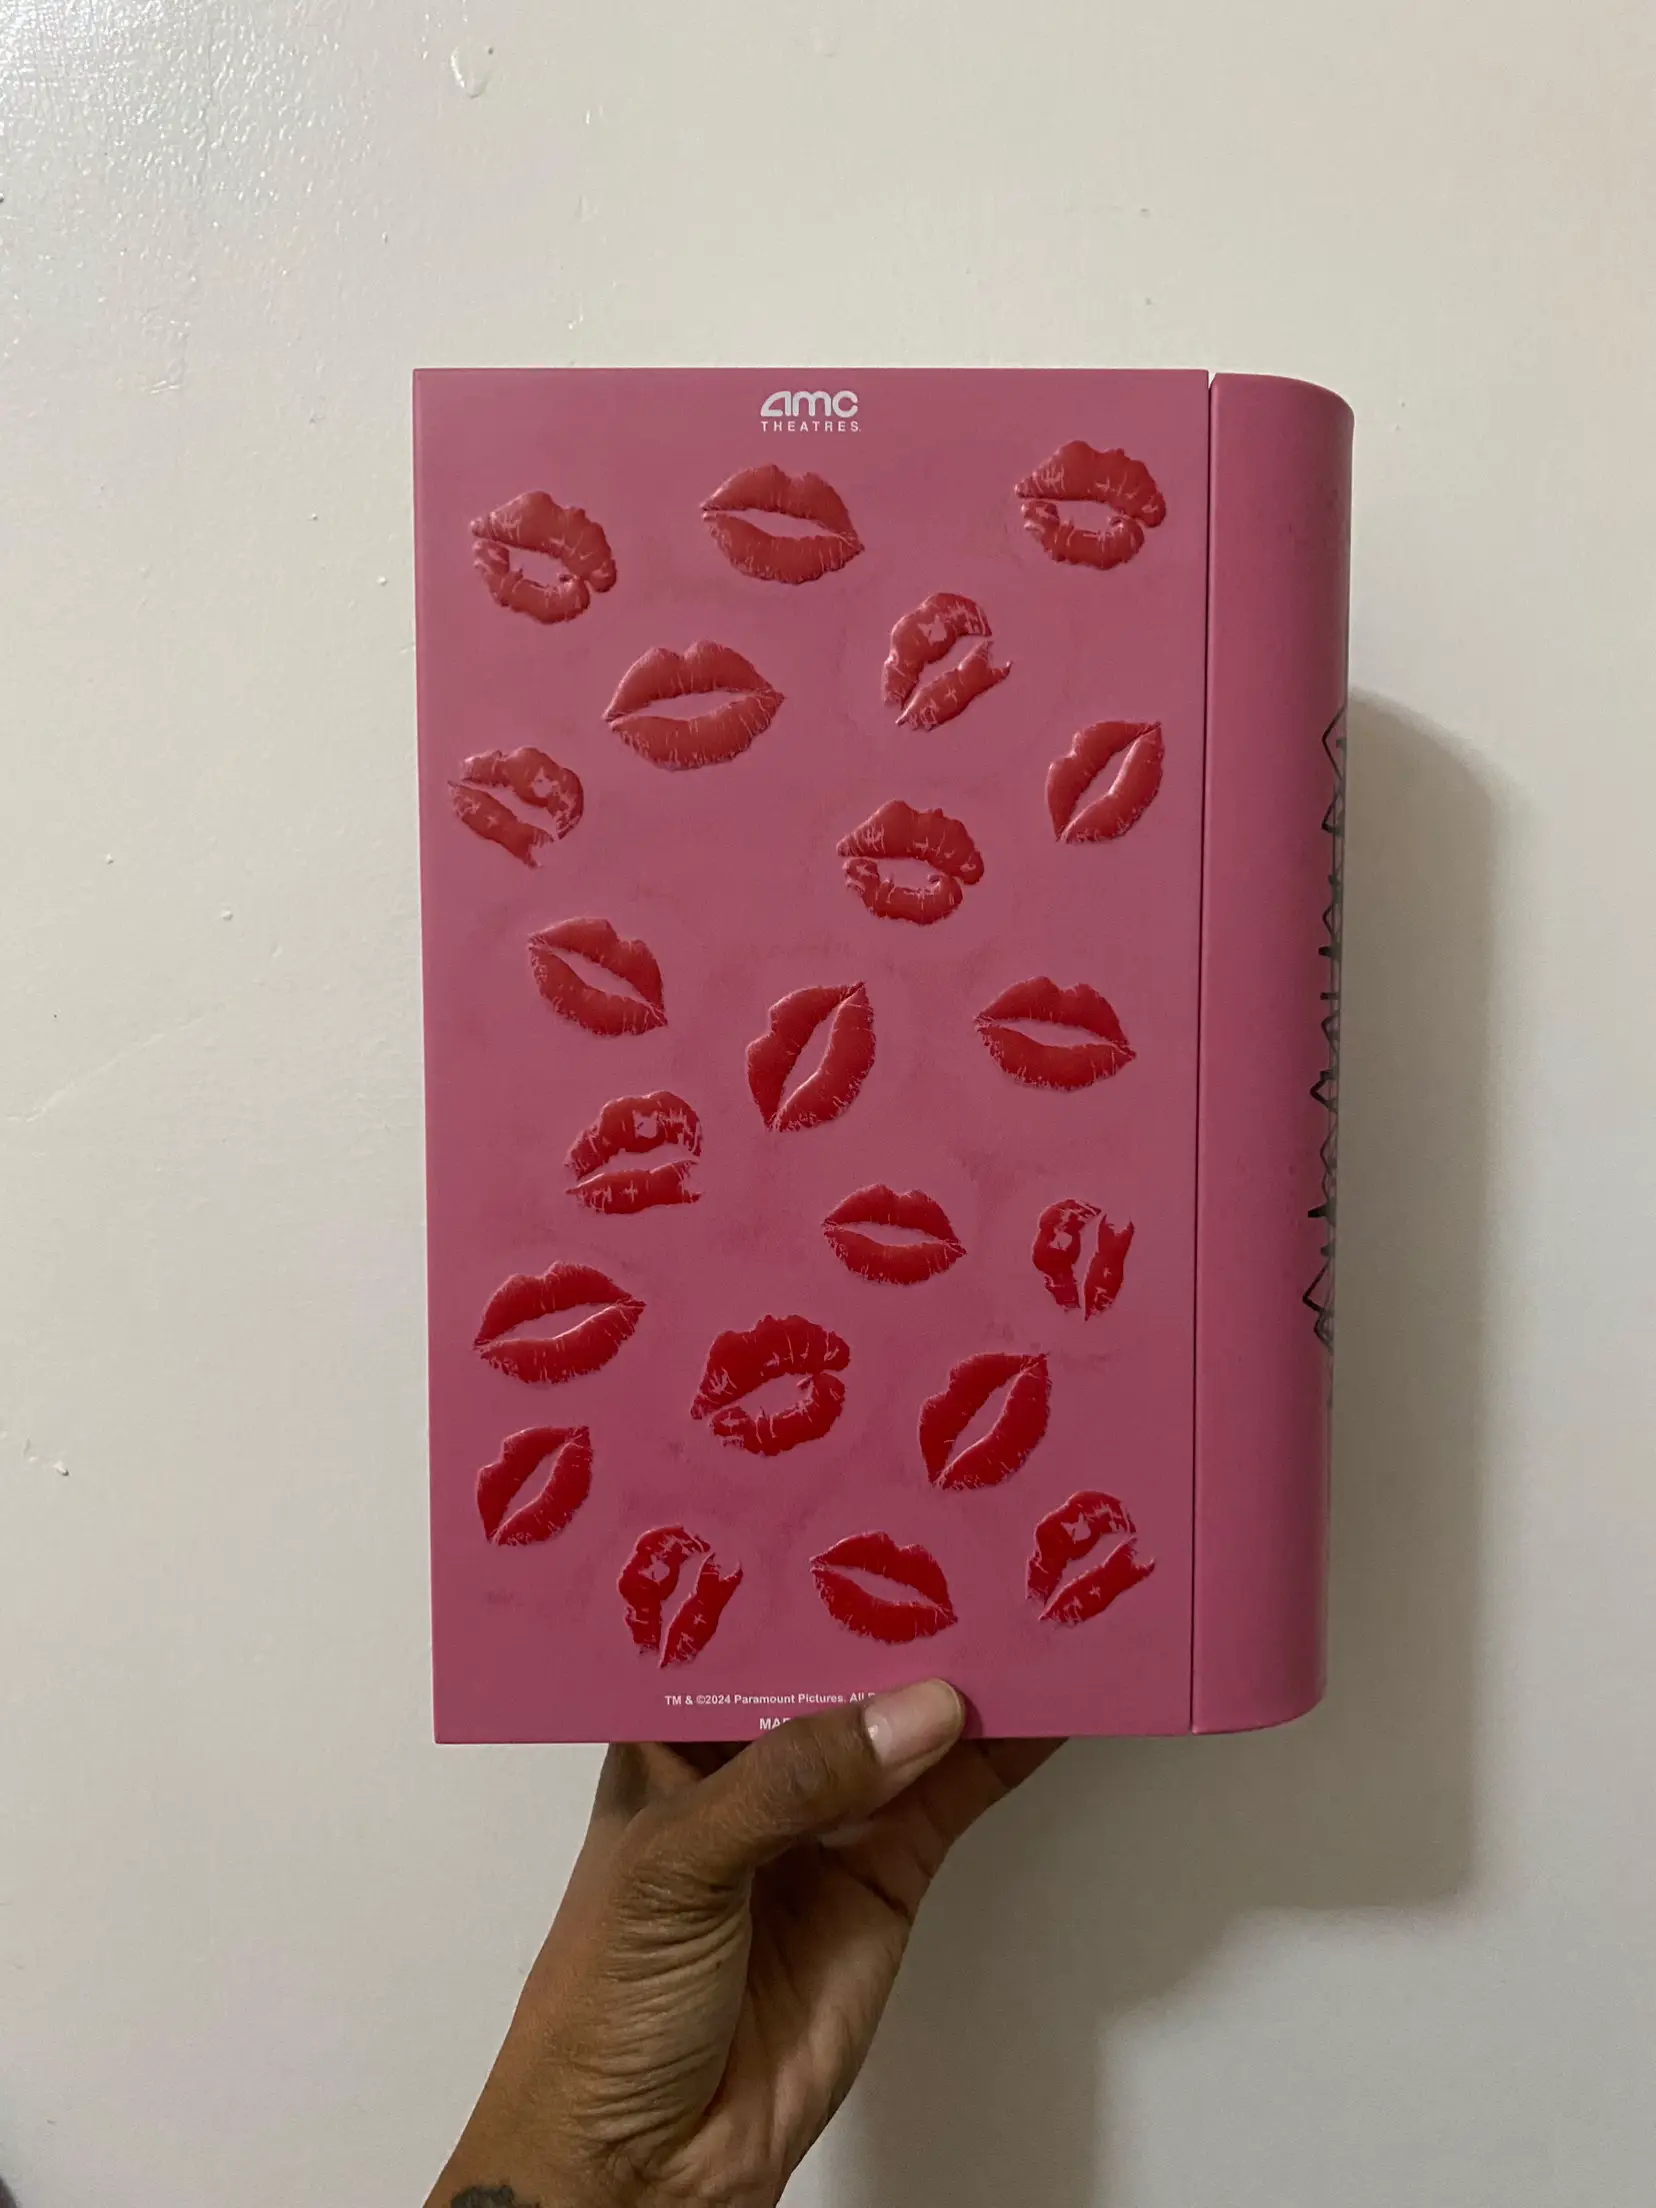  A book with a pink cover and a picture of a kiss on it.